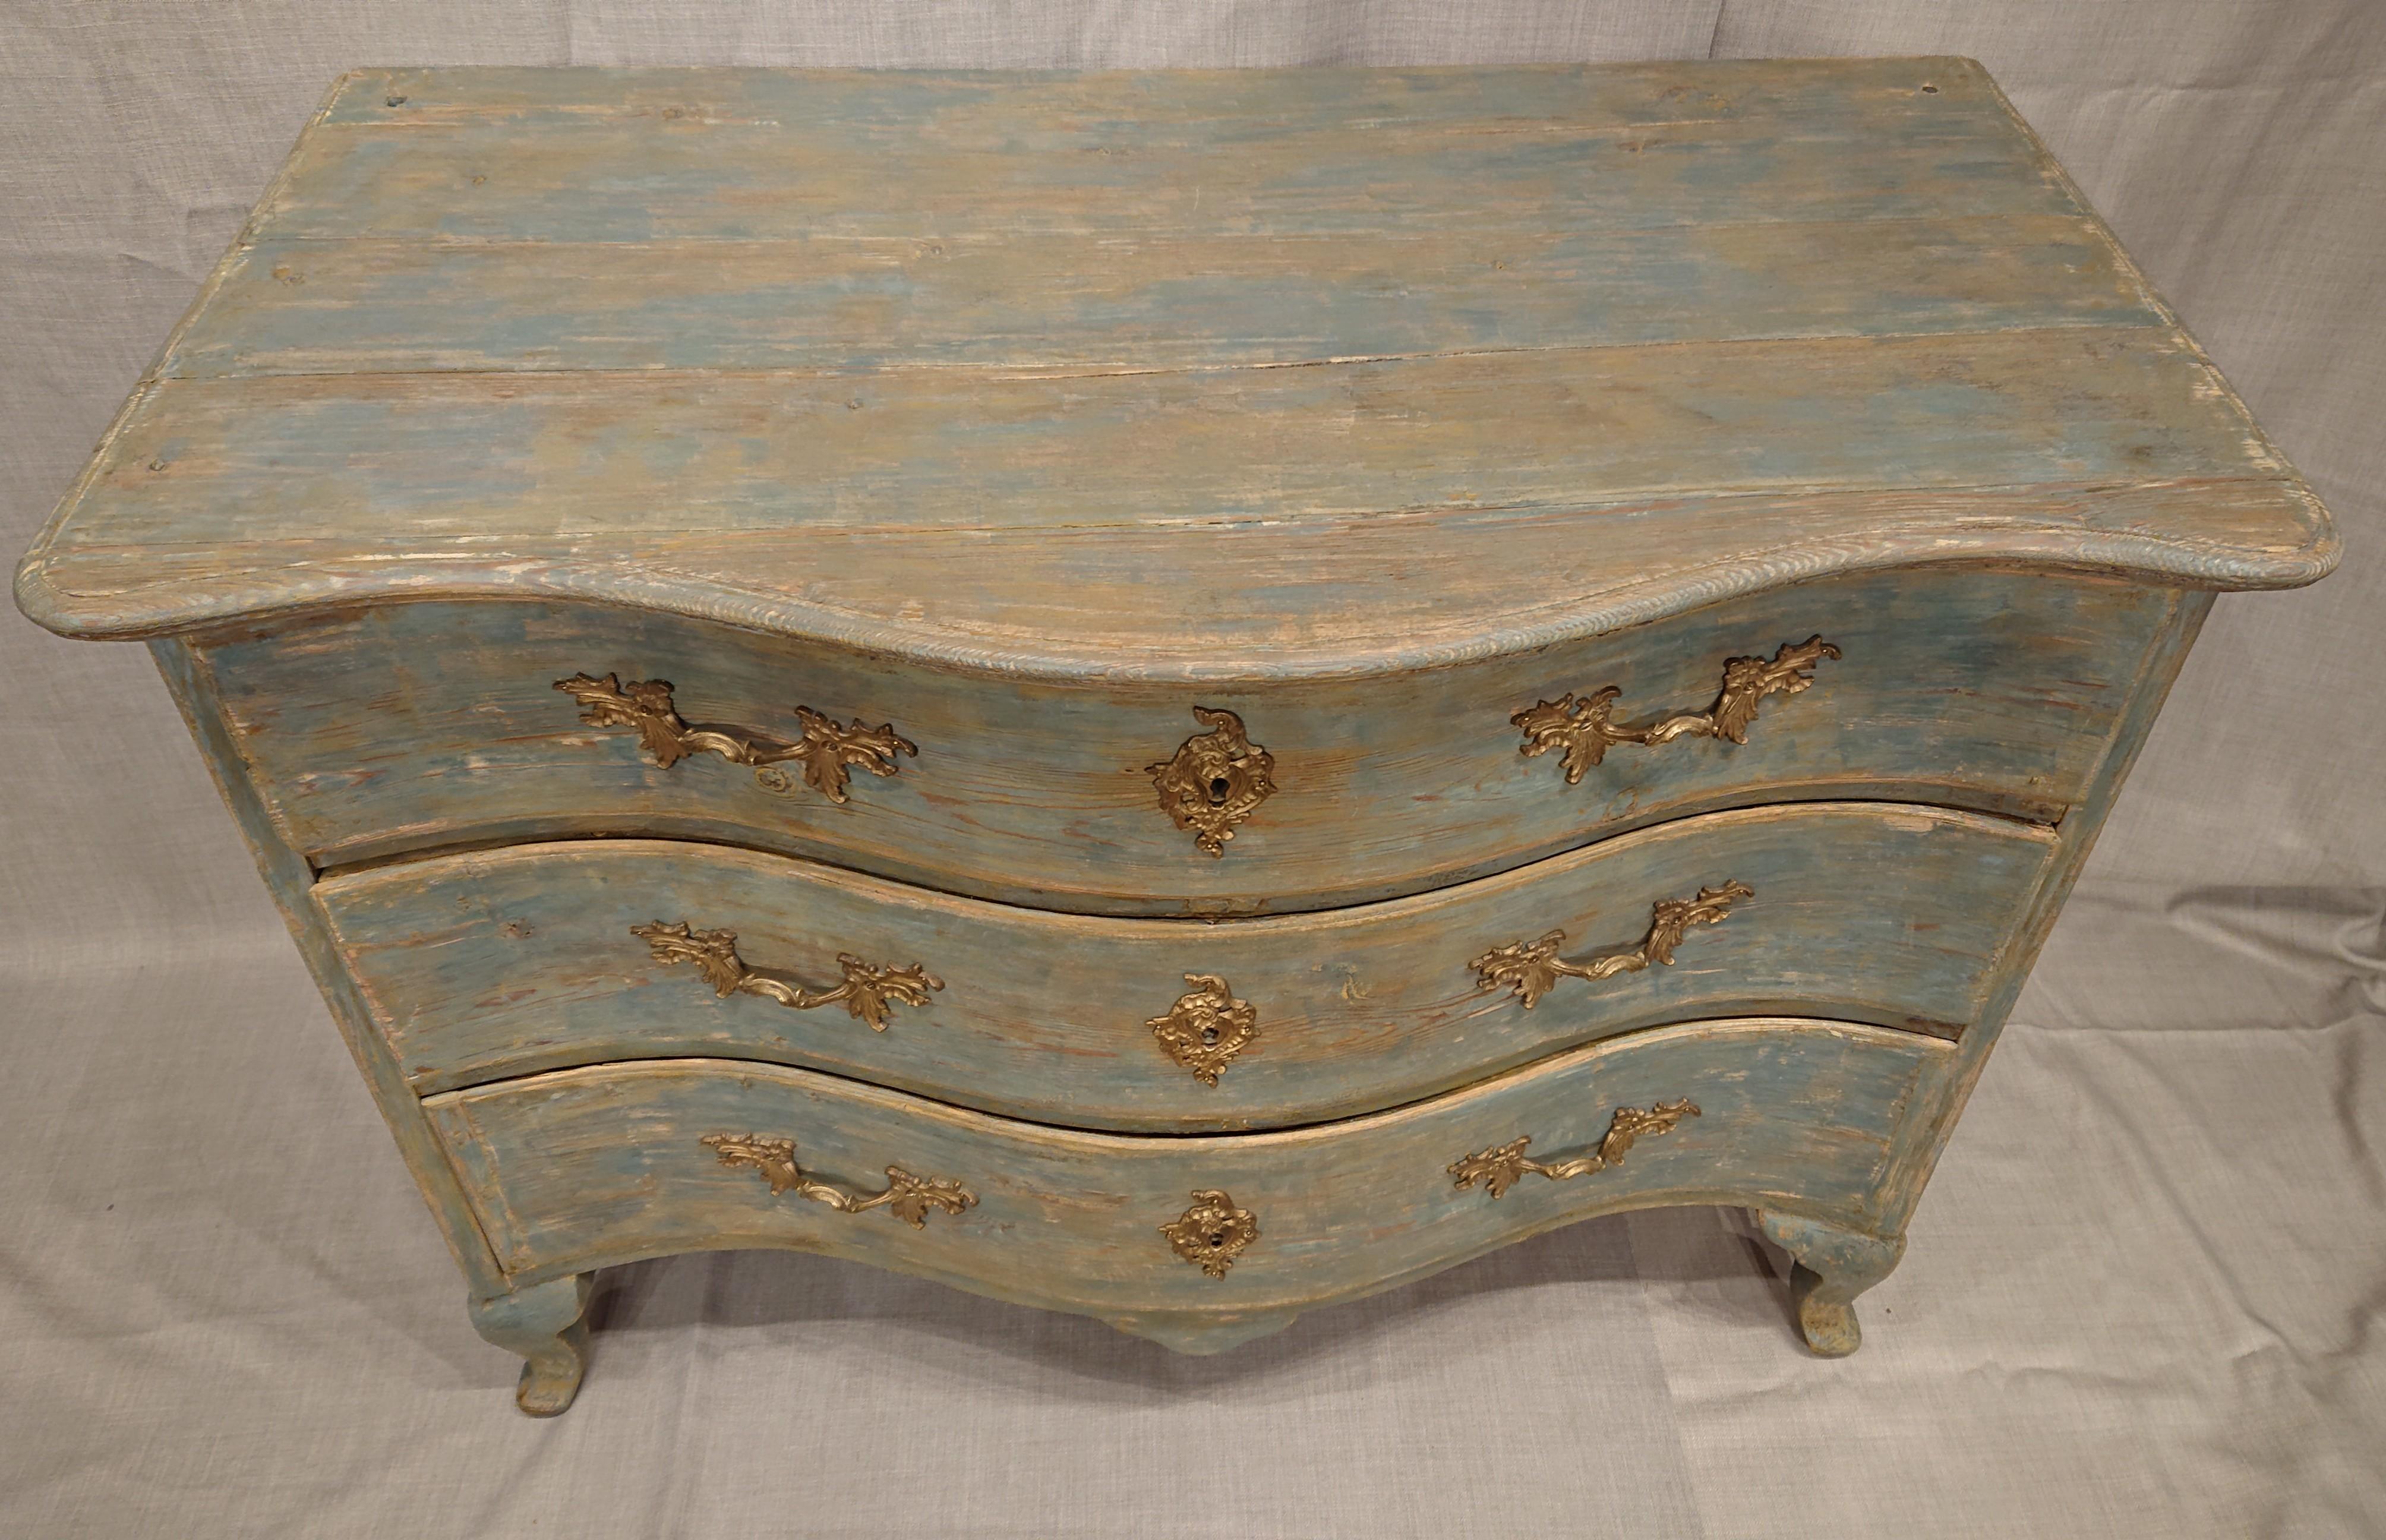 A beautiful 18th century Swedish Rococo Chest of drawers from Lulea Norrbotten, Northern Sweden.
The Chest of drawers has wonderful curvaceous and beautiful Shaped legs.
The Chest of drawers has trace of original paint.
Alot of retuches of the